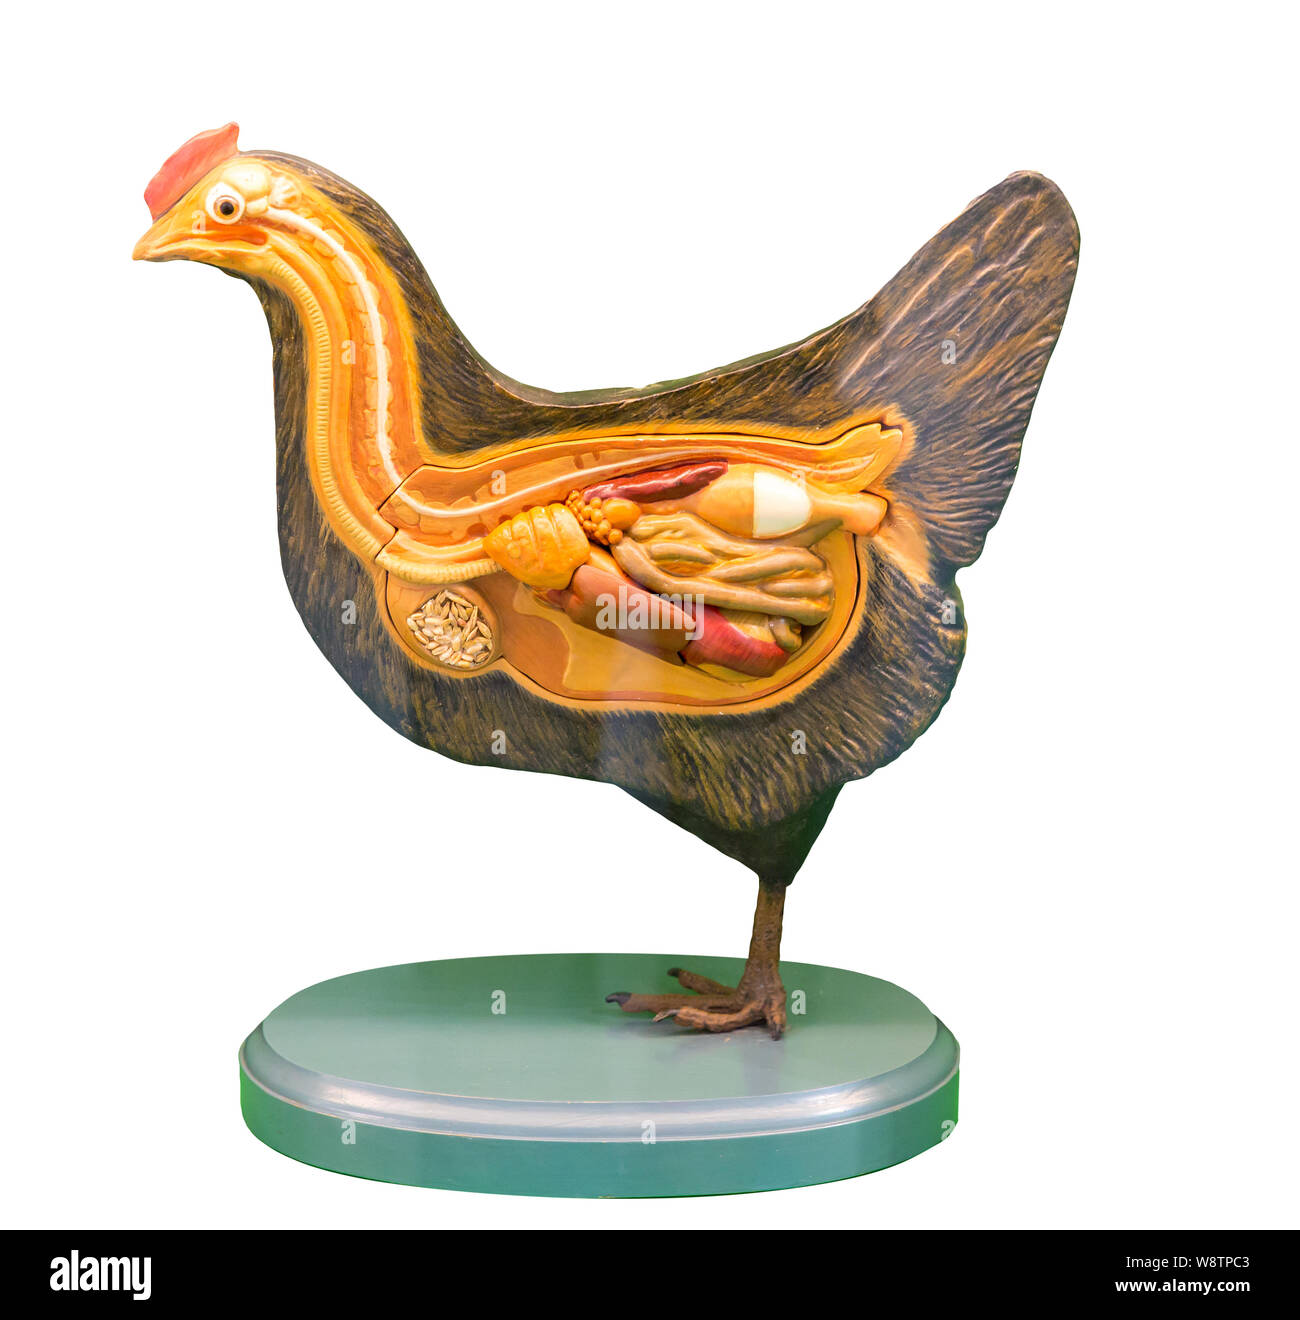 Anatomical model of hen, education concept Stock Photo